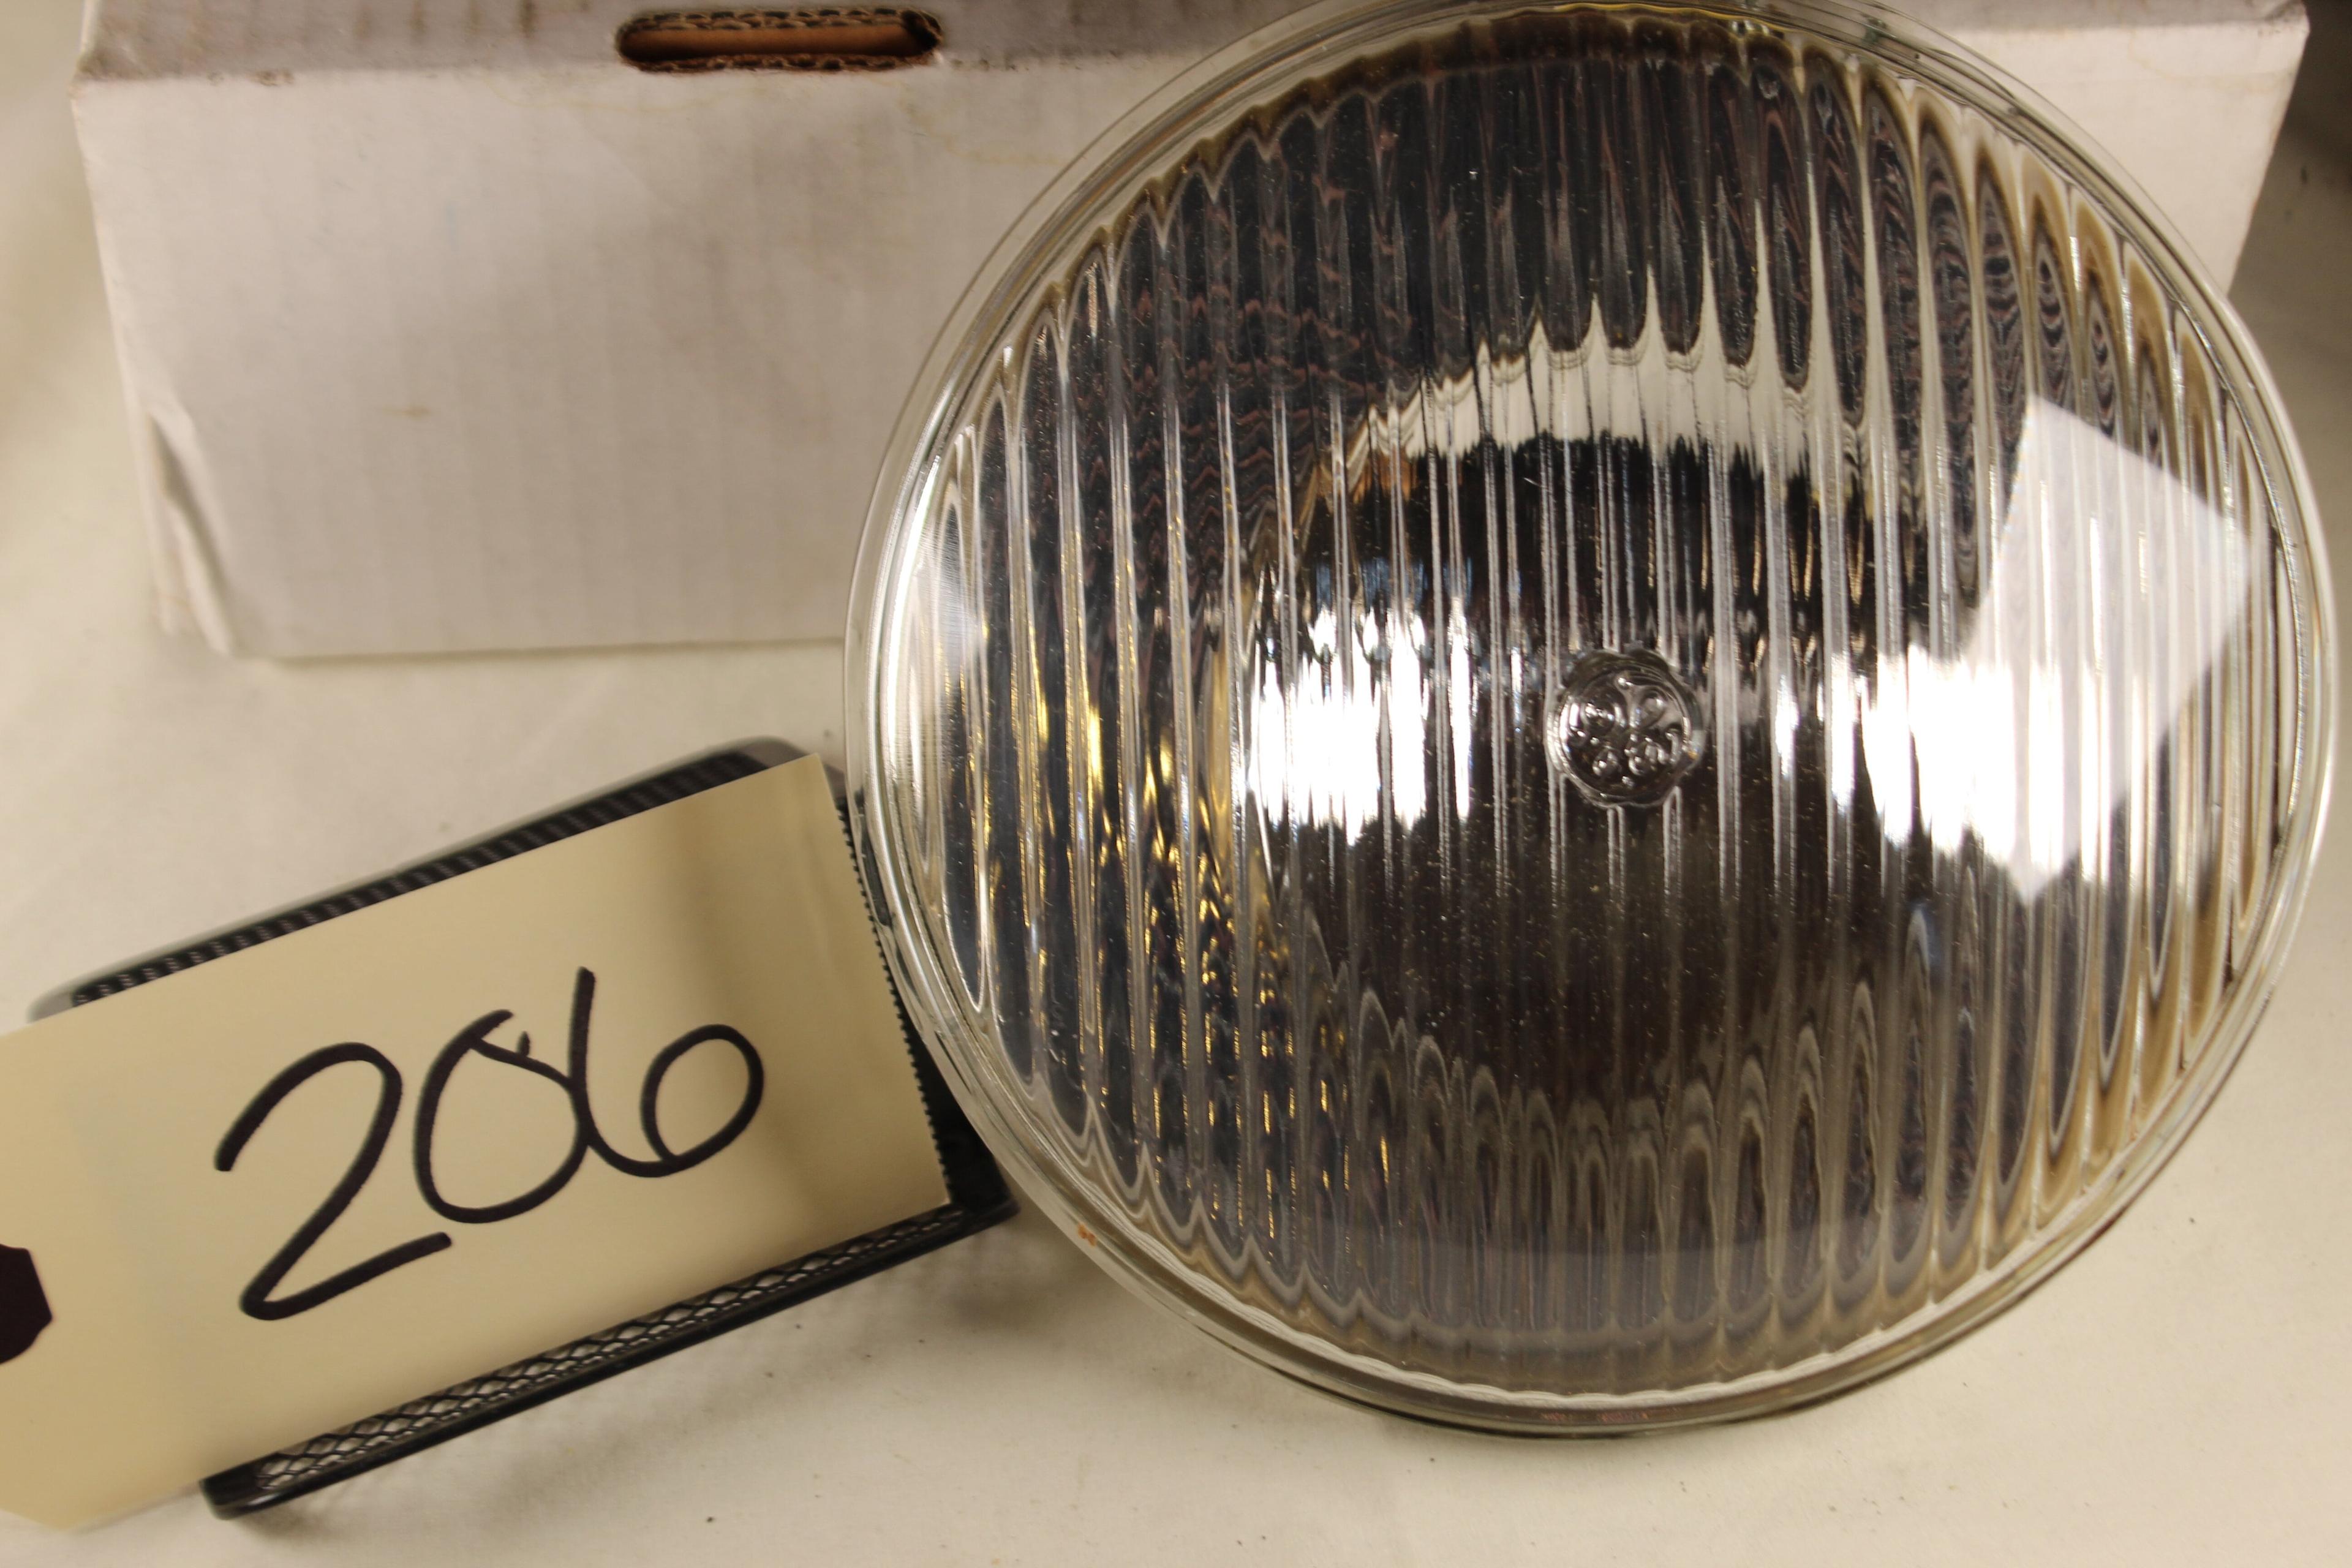 General Electric All Glass Sealed Beam Lamp Set of 2 MCG 561-BS